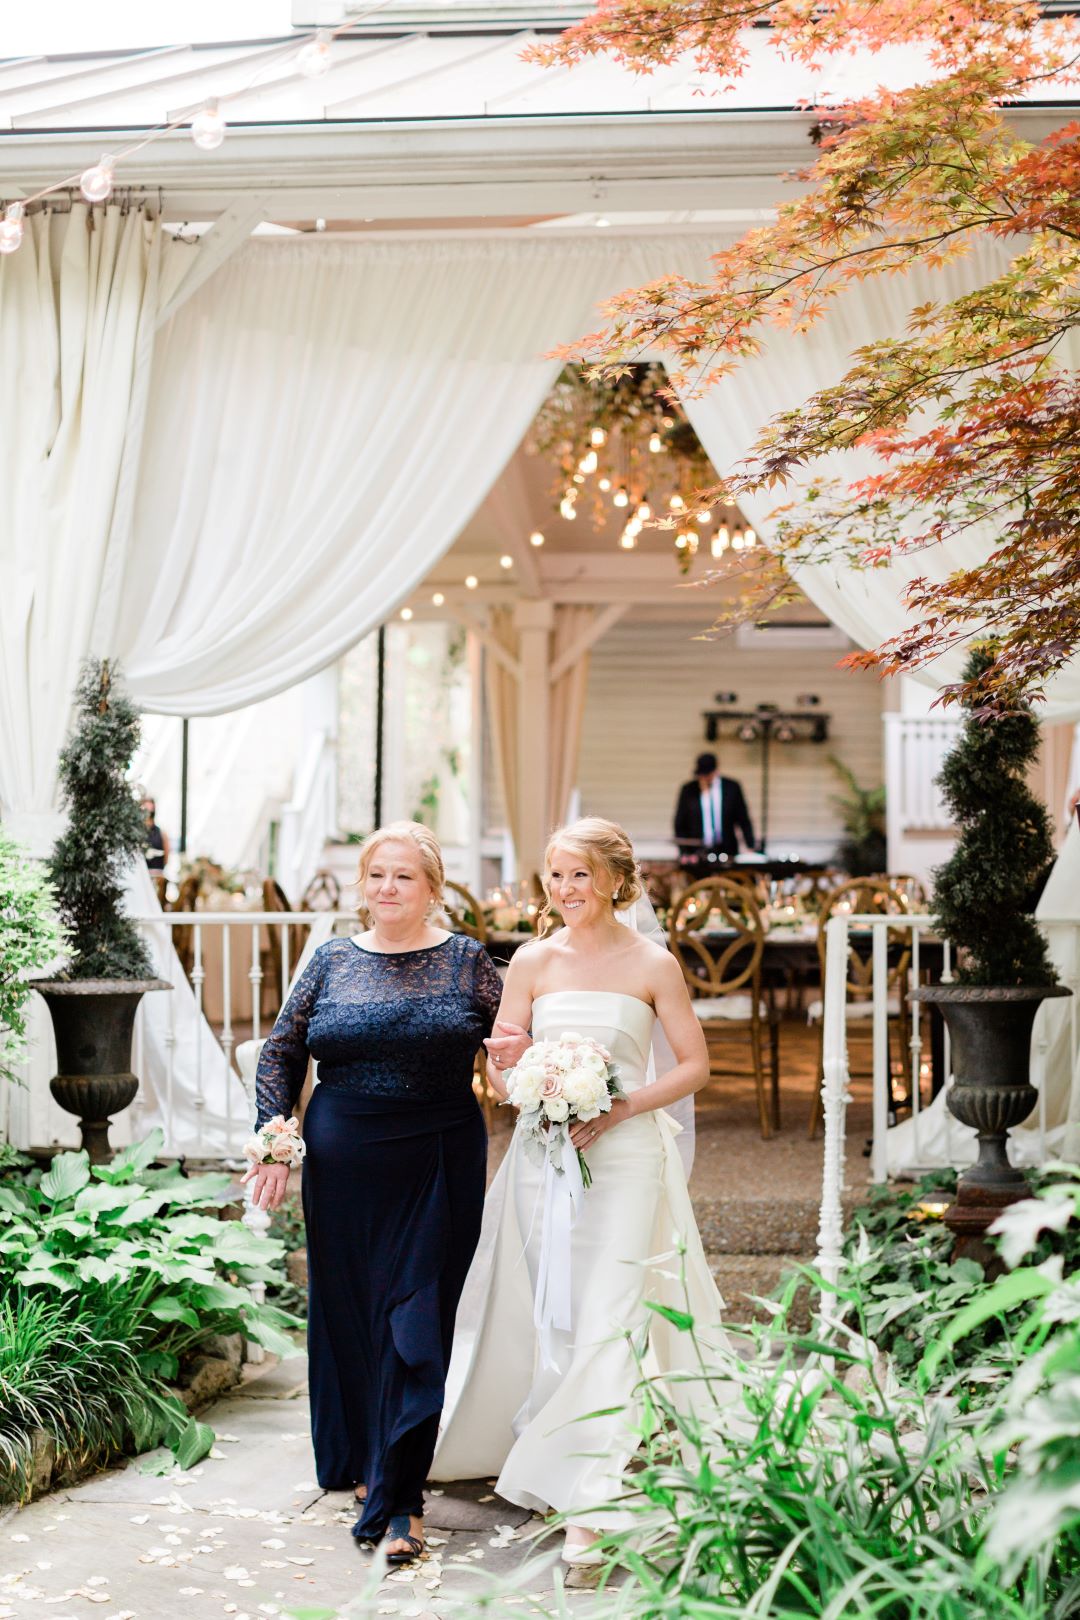 CJ's Off The Square | Bride's mother walking her down the aisle in the garden